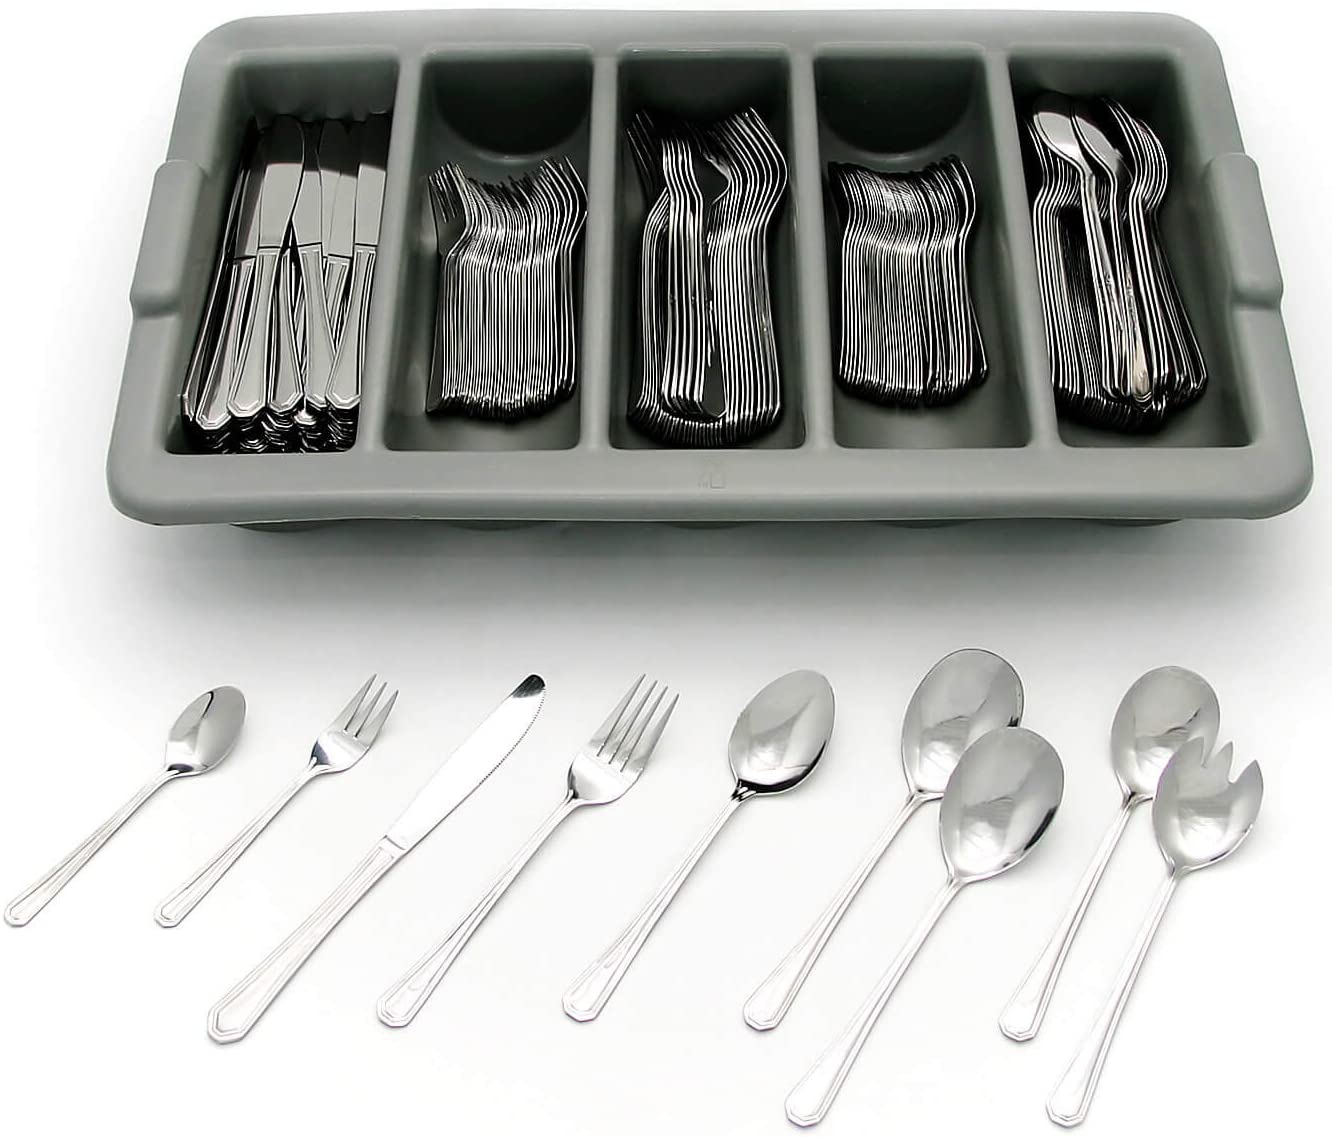 GRAWE GRÄWE Cutlery for 40 people in the cutlery box, 204 pieces - forks, spoons, knives, coffee spoons, cake forks, serving cutlery, salad servers - Berlin series